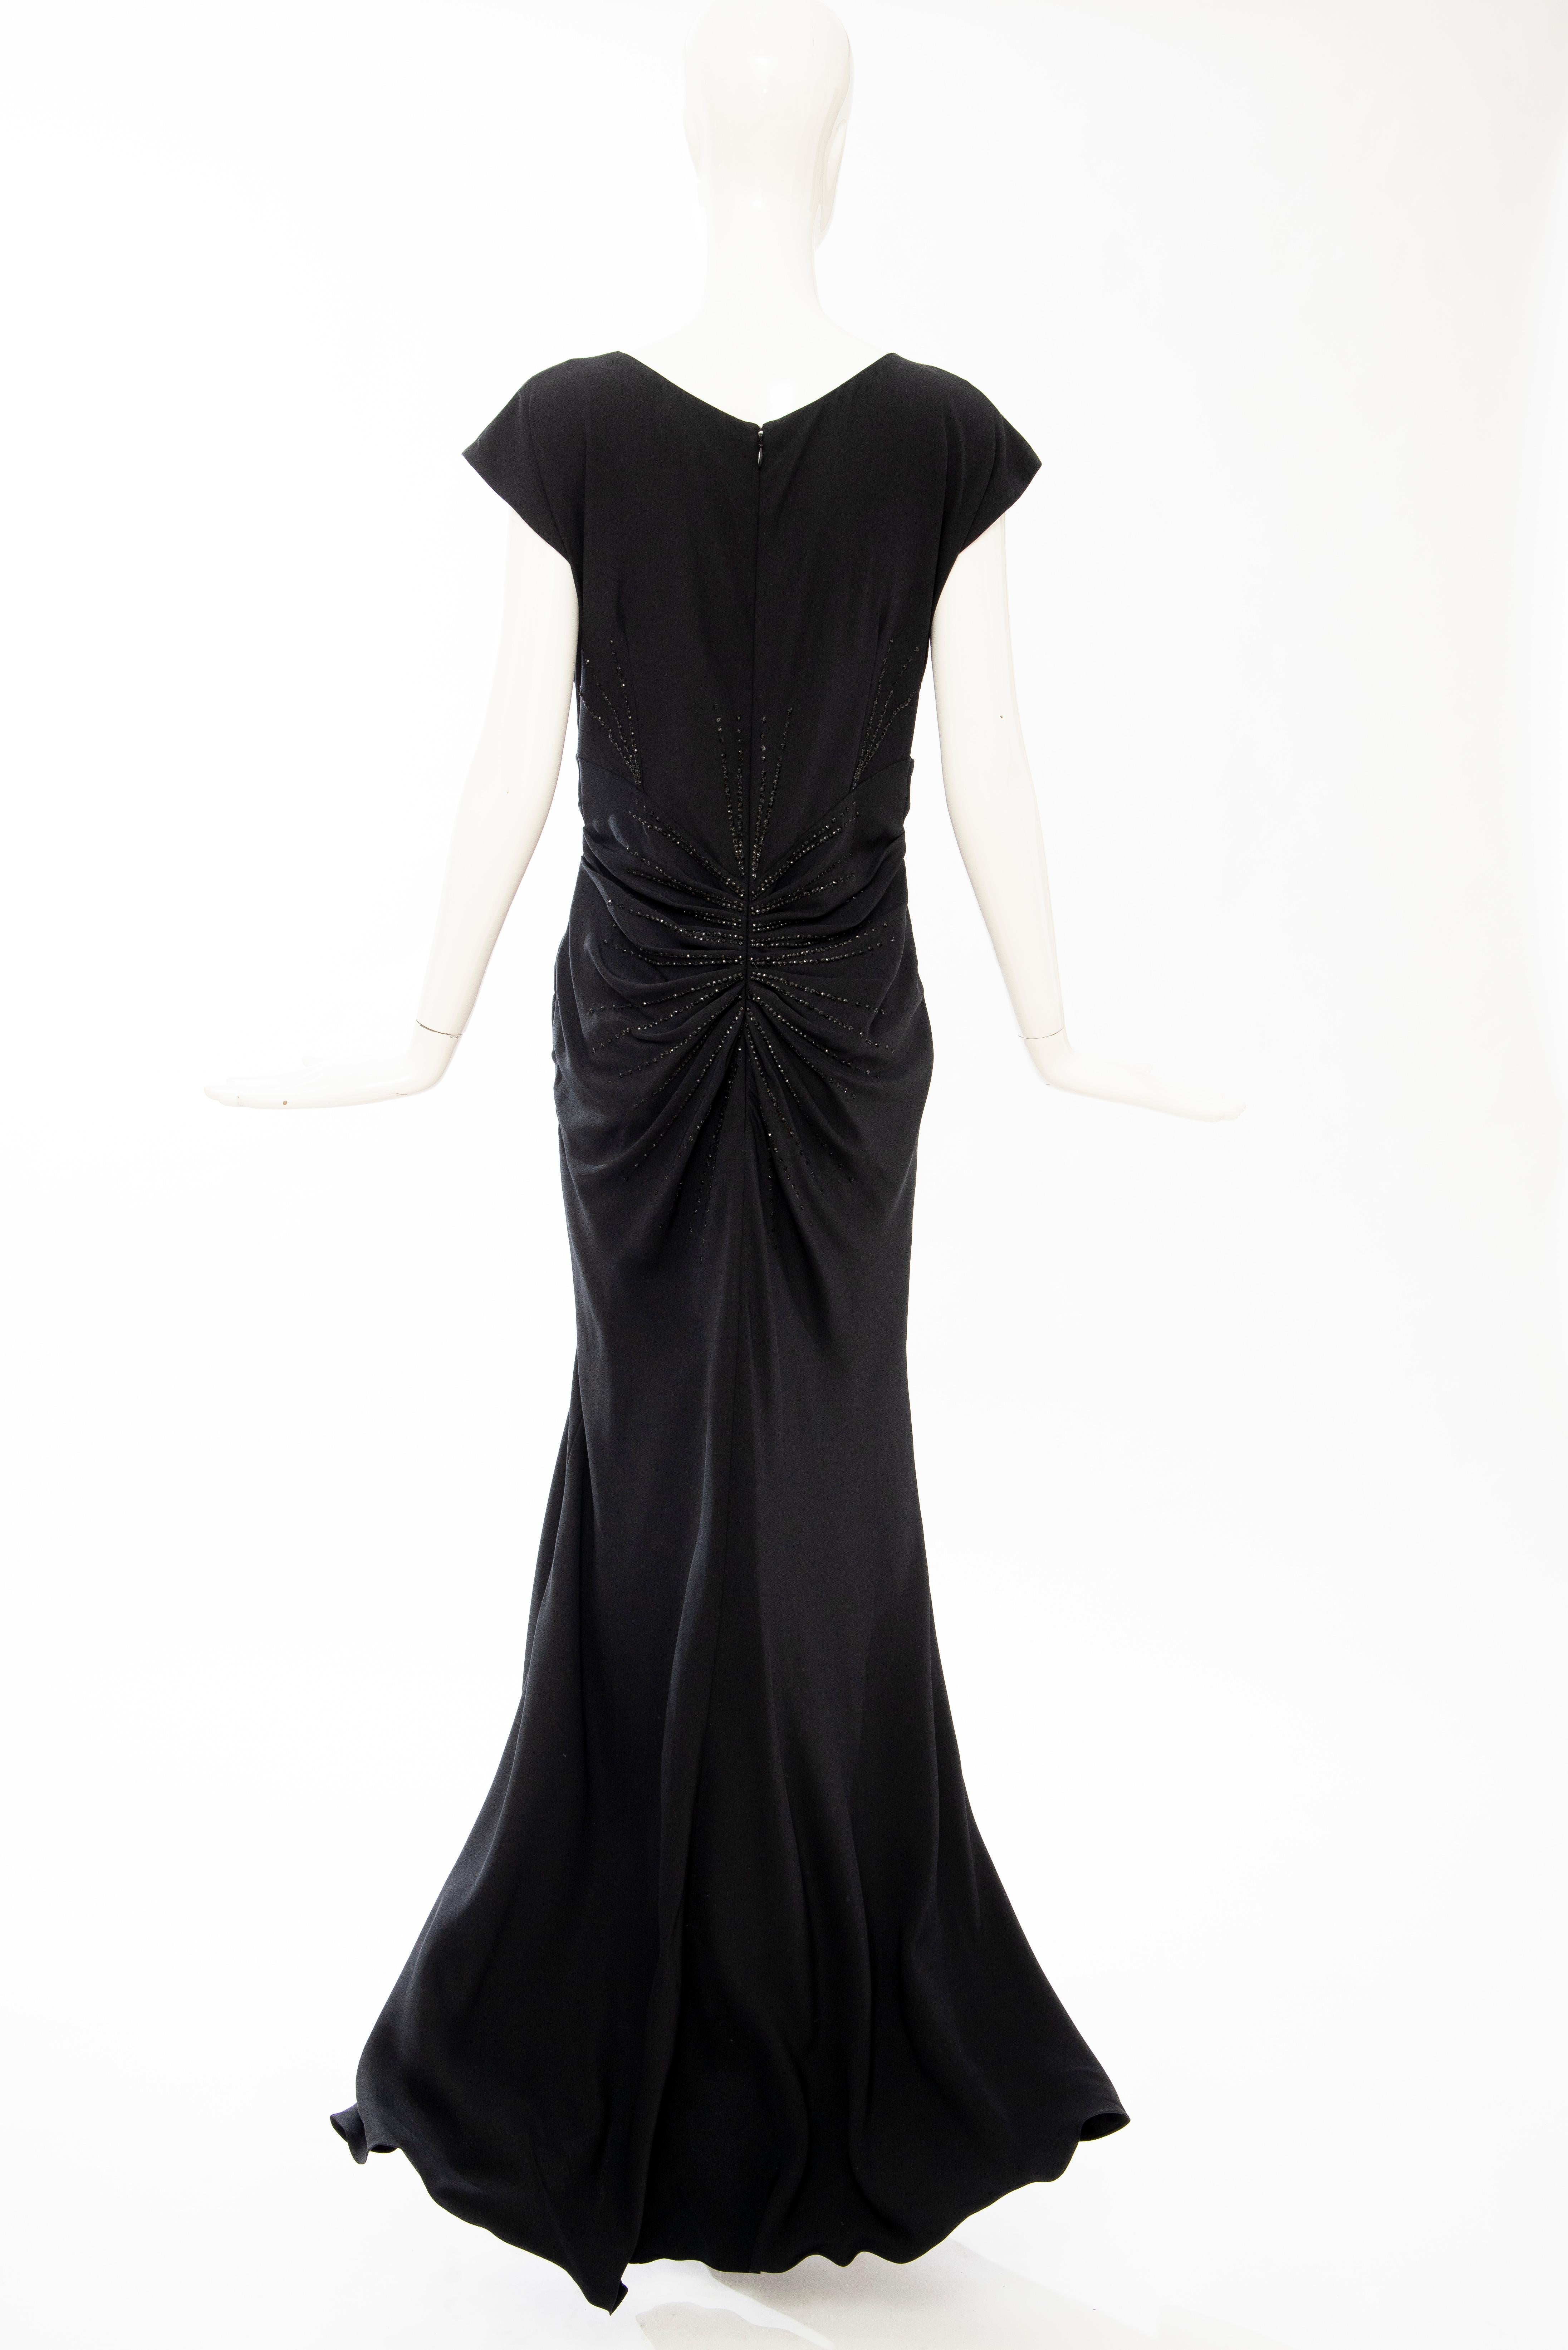 John Galliano for Christian Dior Black Embroidered Evening Dress, Spring 2008 5